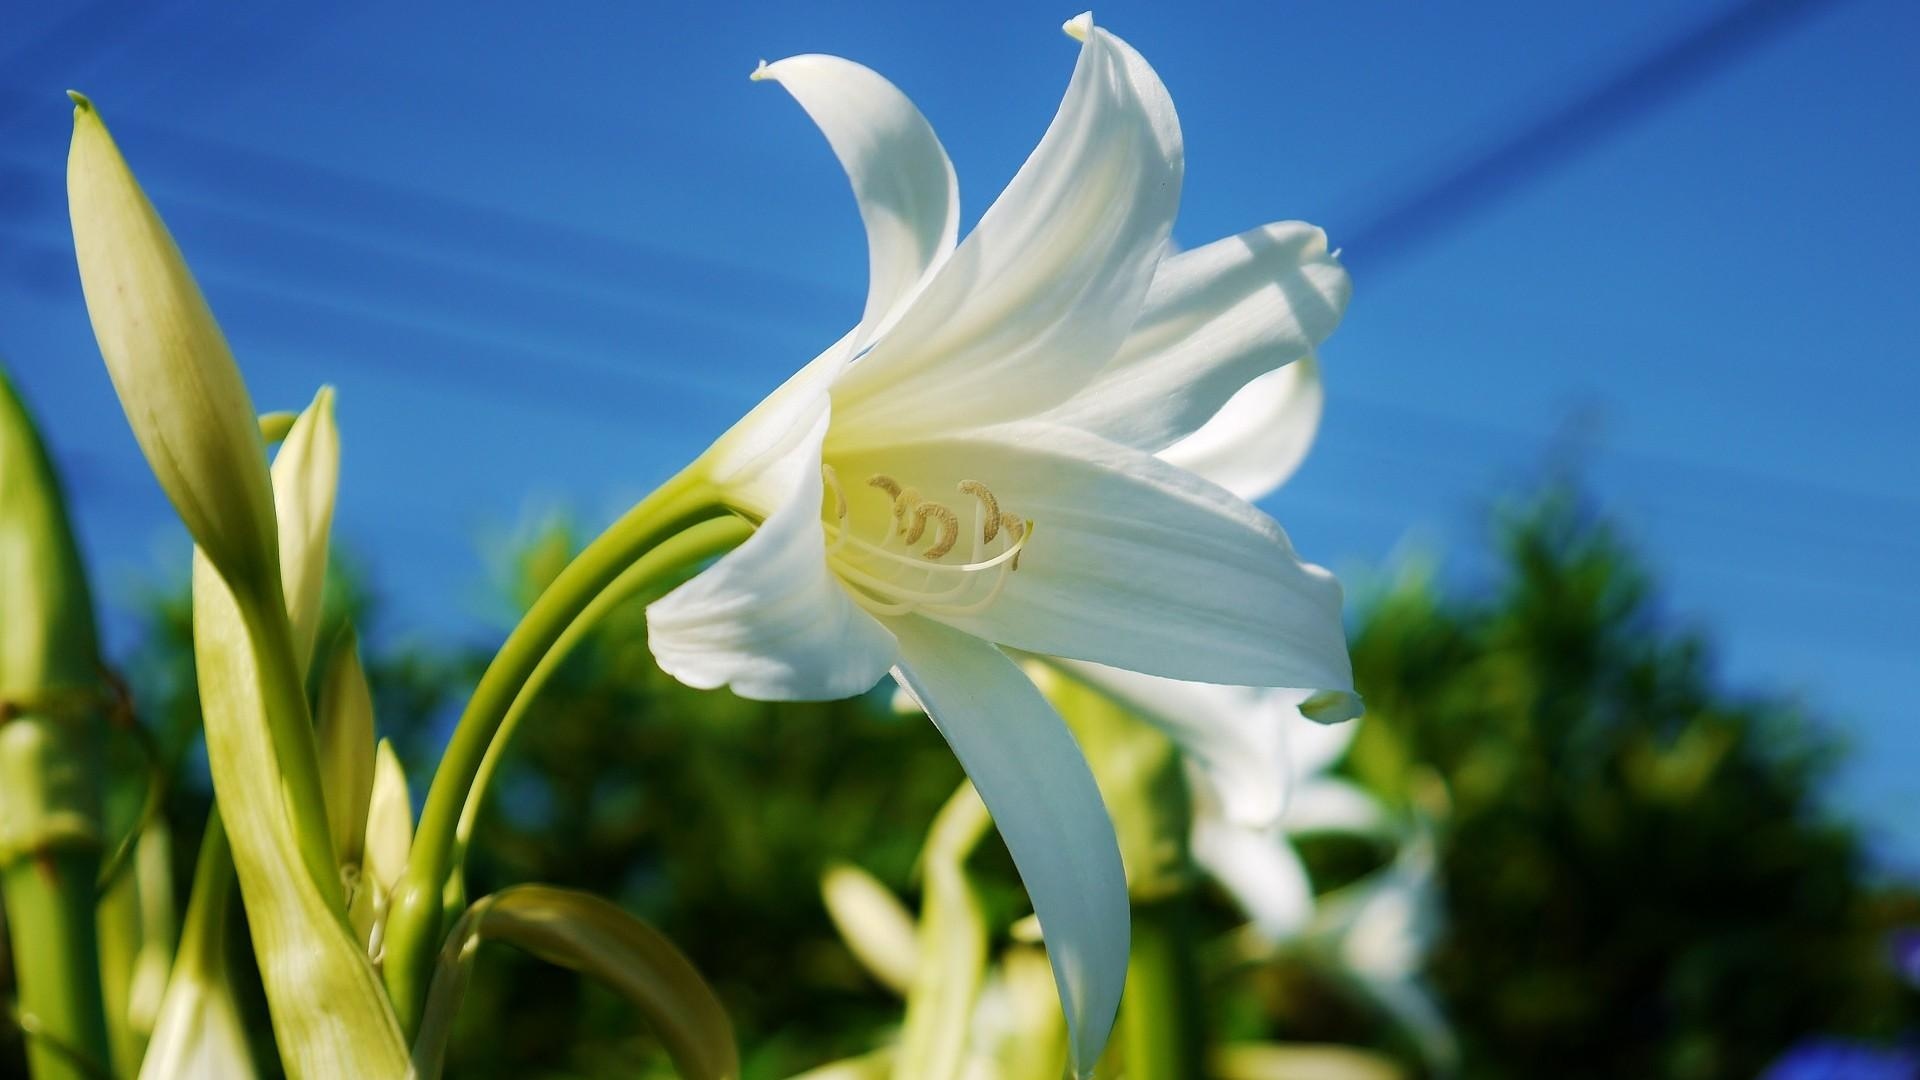 Lily Flower Snowy Sky Close Up Wallpaper Background Full HD 1080p